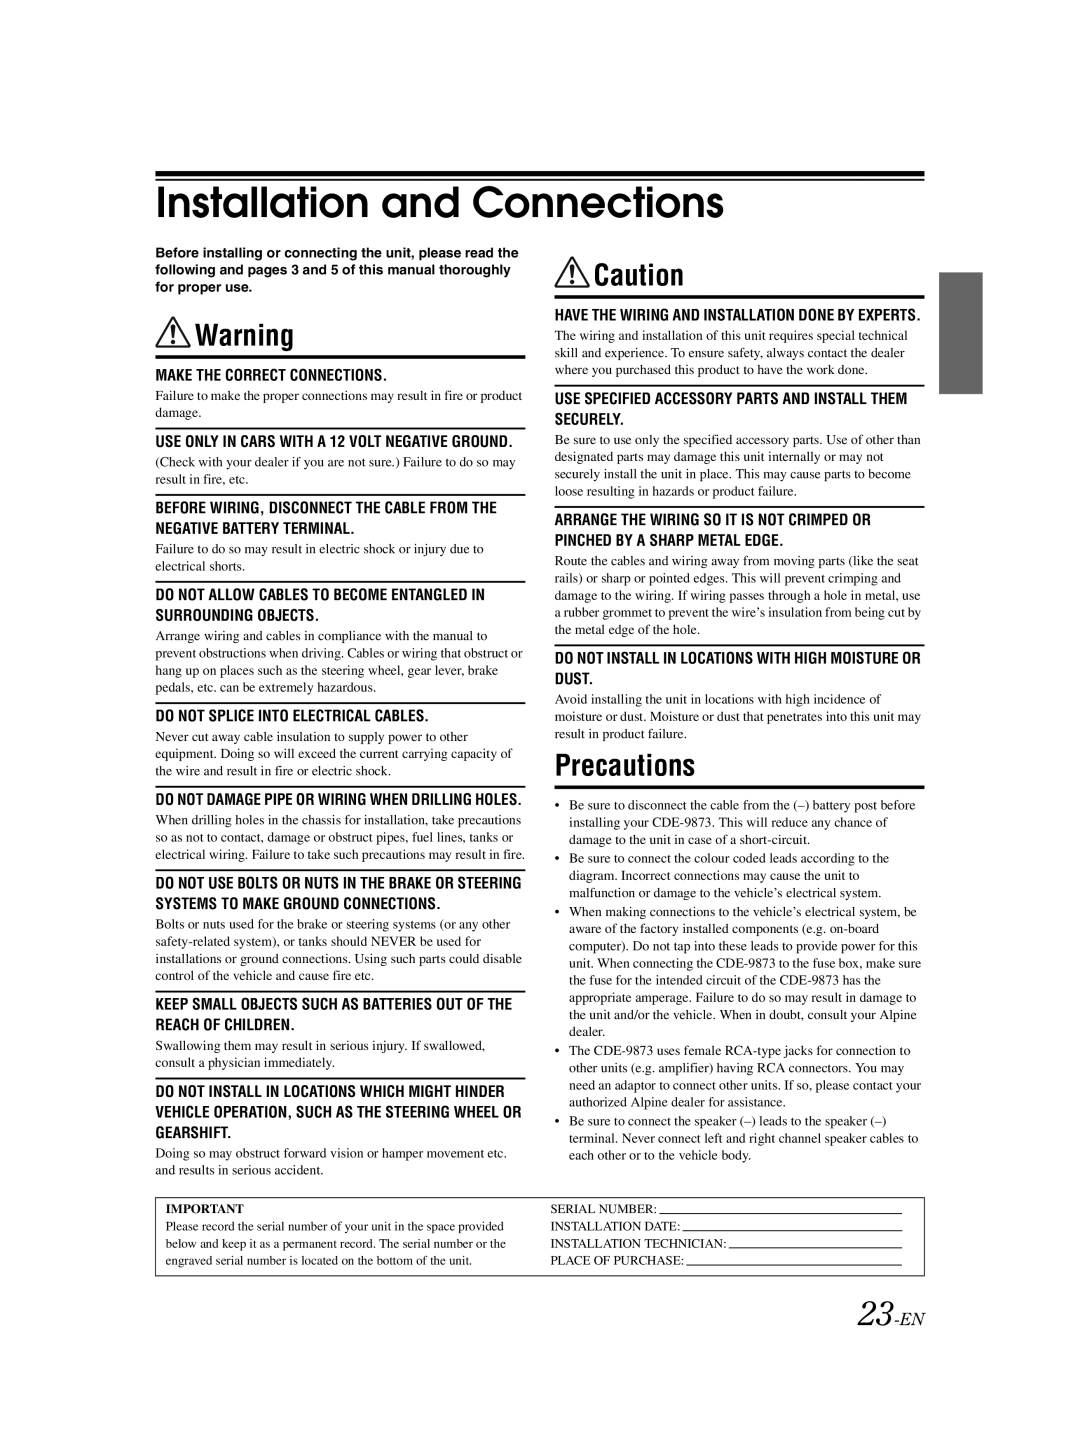 Alpine CDE-9873 owner manual Installation and Connections, Precautions, 23-EN 